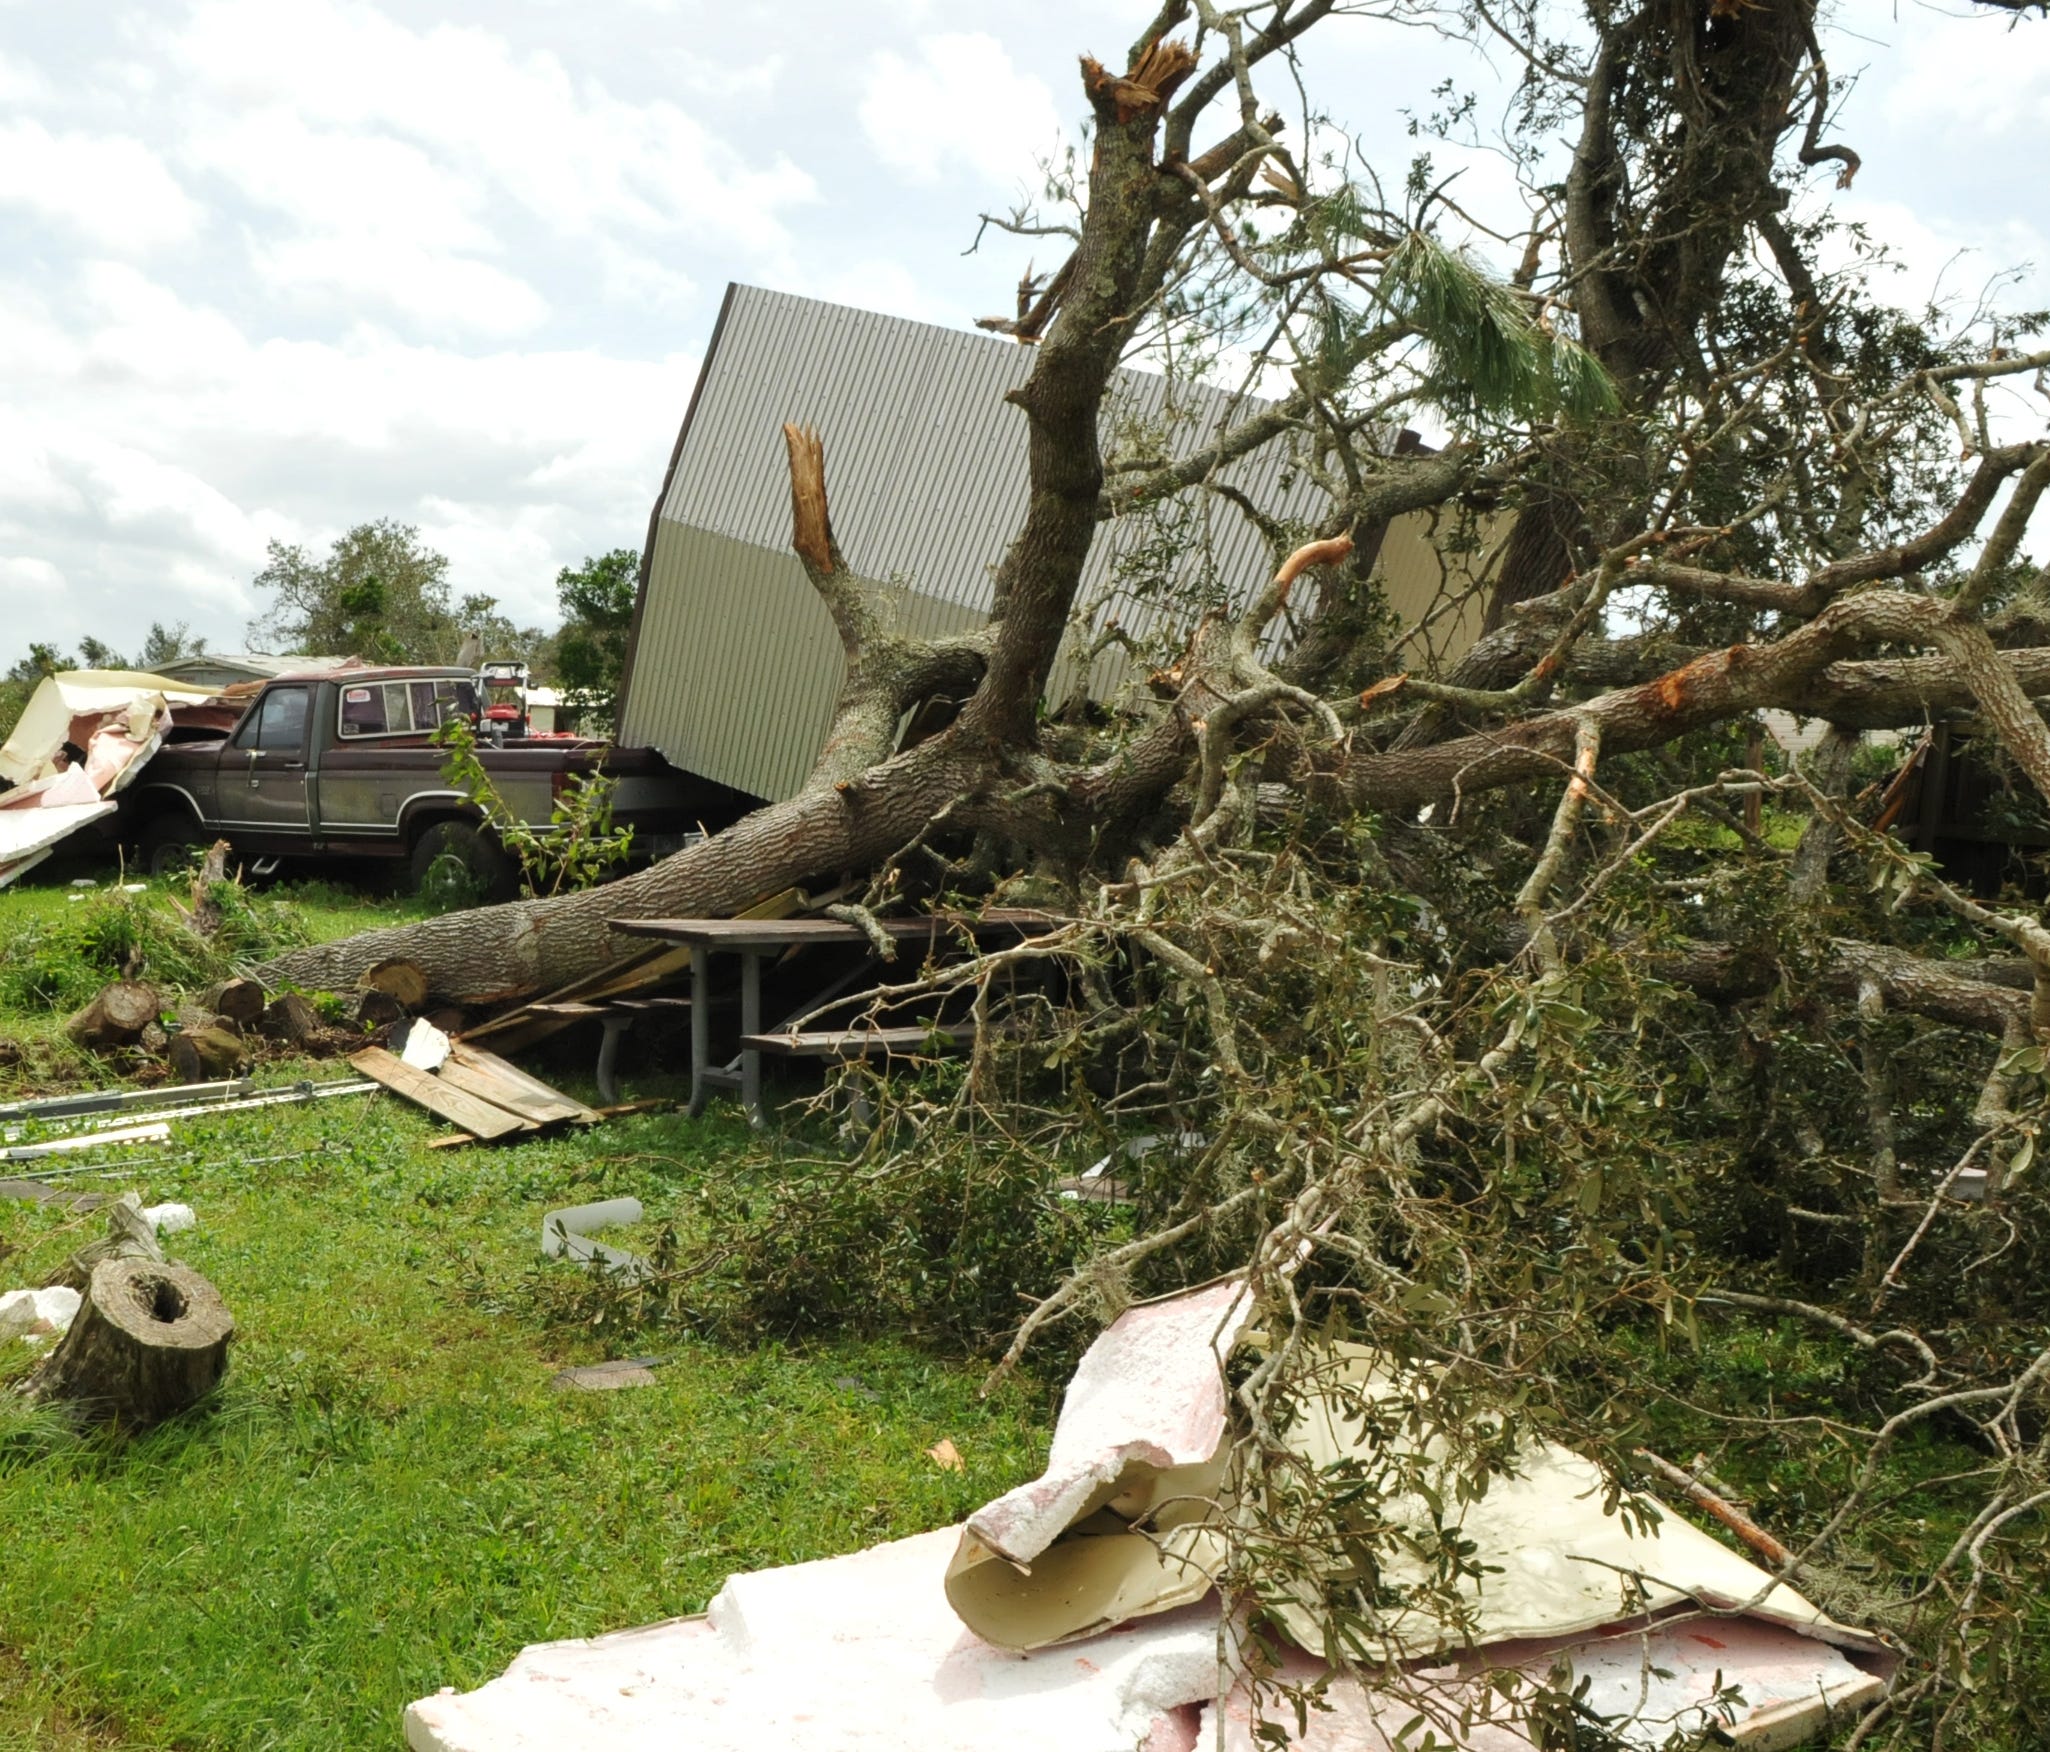 Several homes in Mims, Fl. in North Brevard County are damaged after a Hurricane Irma spawned tornado hit.